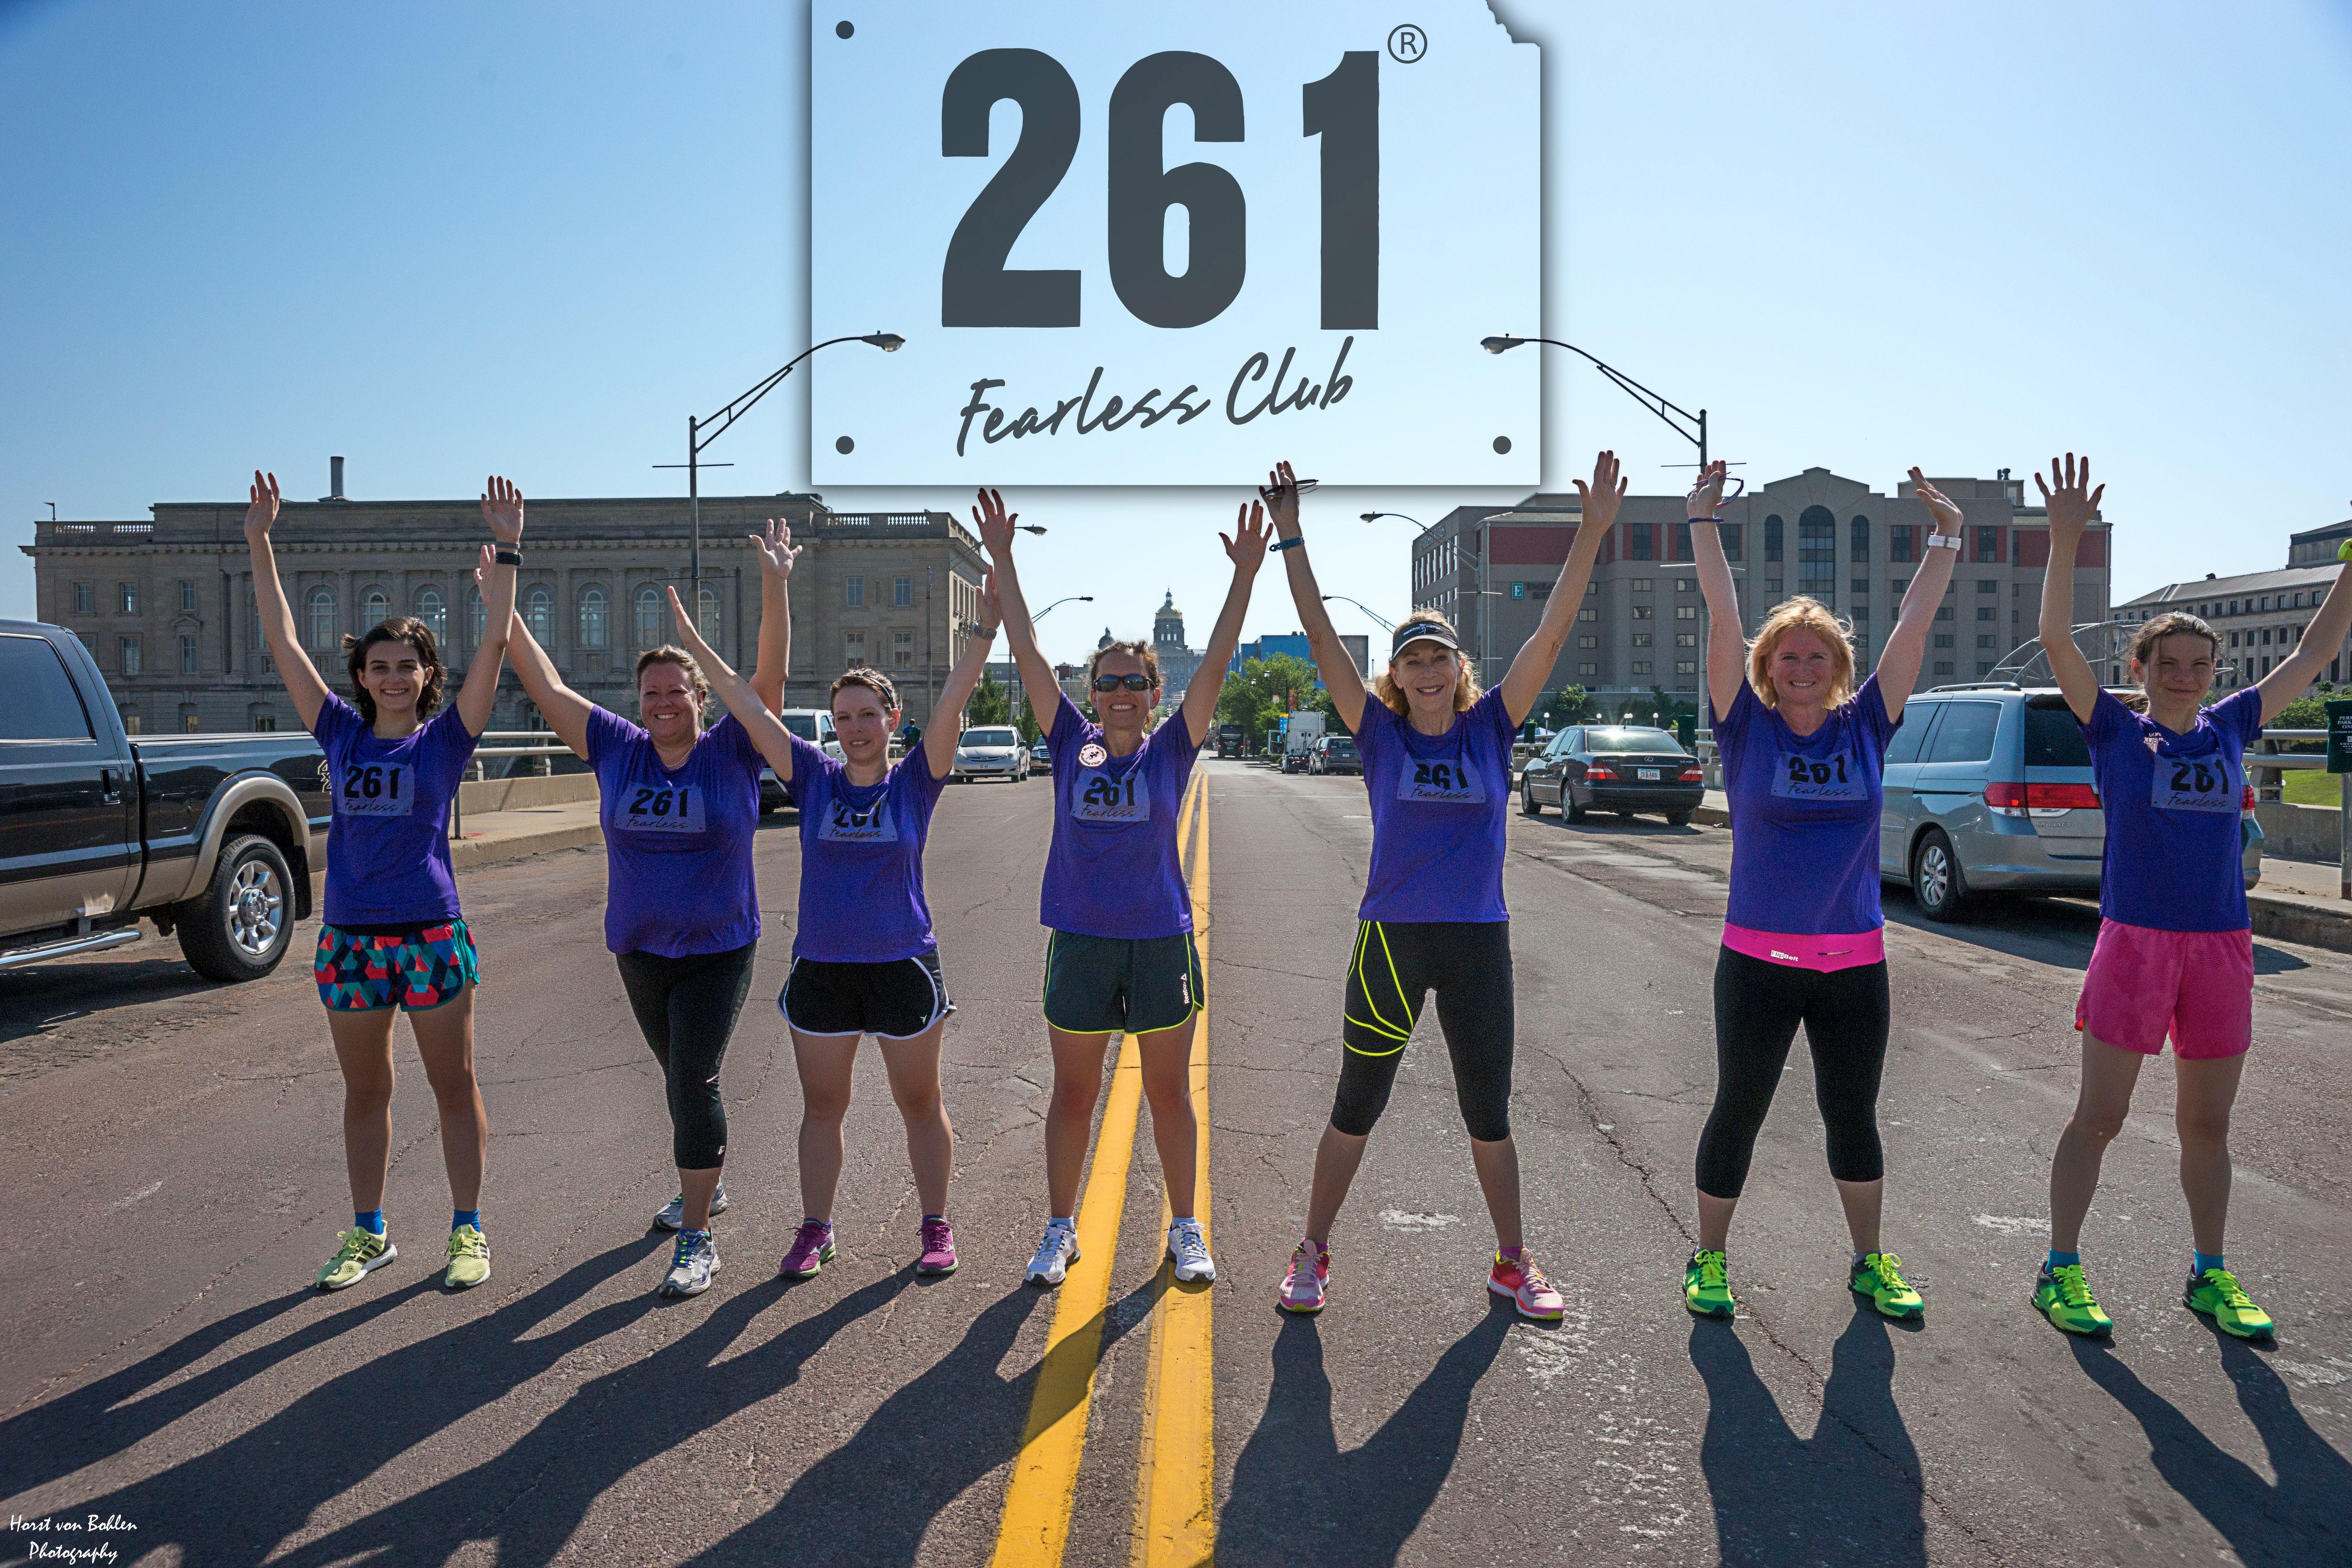 Social Run/Walk/Workout with 261 Fearless